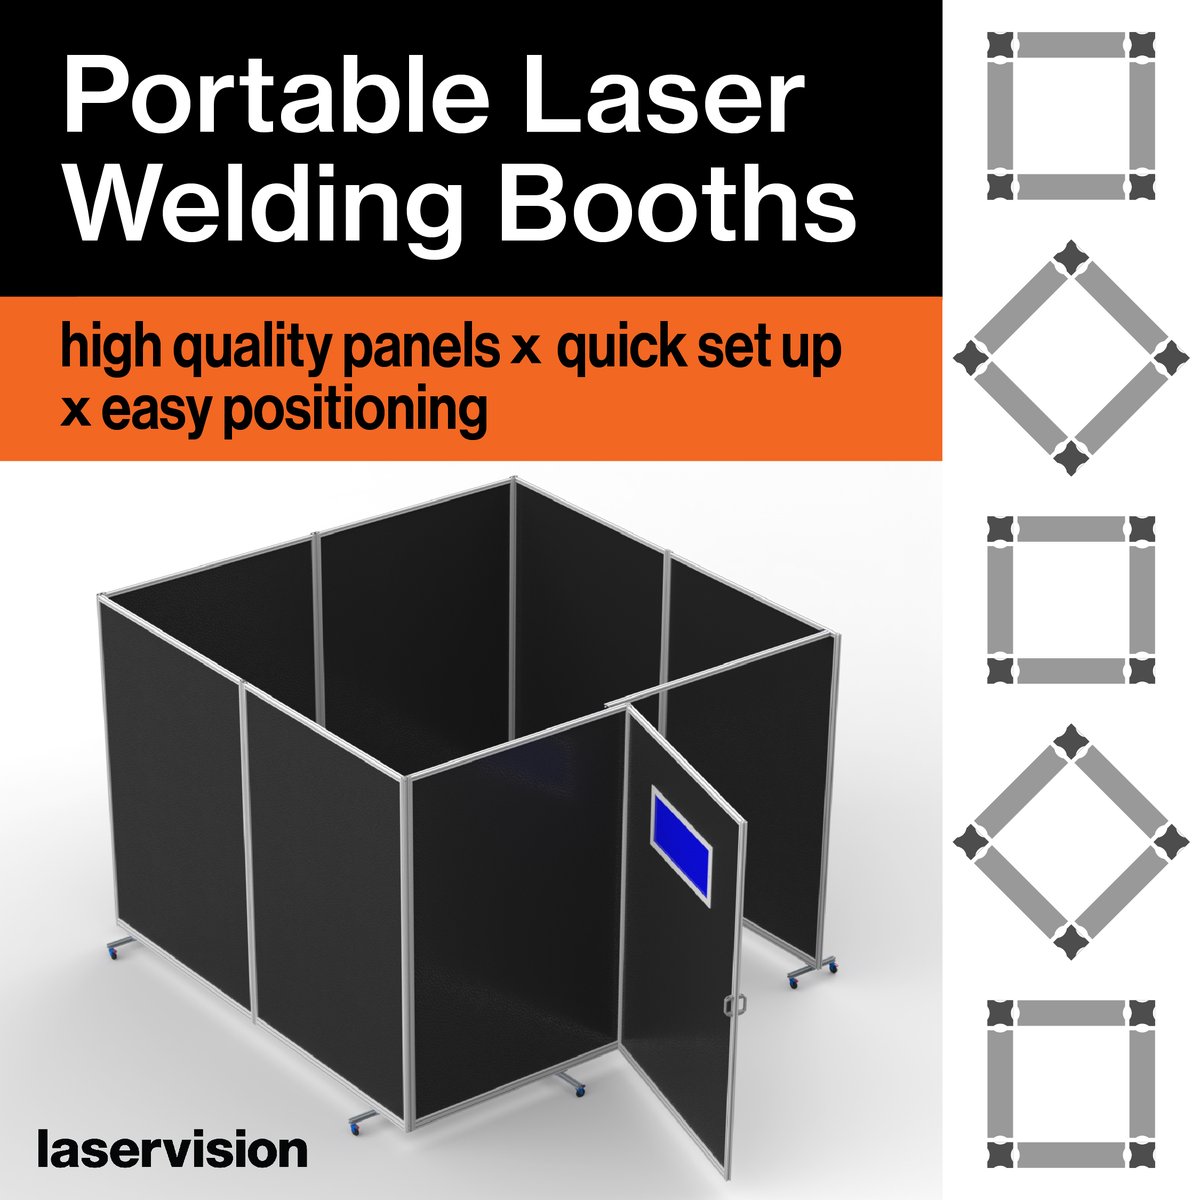 April is National Welding Month! Have you checked out our welding booths? Available in three sizes and made of pre-assembled panels for quick and easy set-up!
lasersafety.com/barriers/rigid…...
#LaserWelding #protectingpeople #NationalWeldingMonth